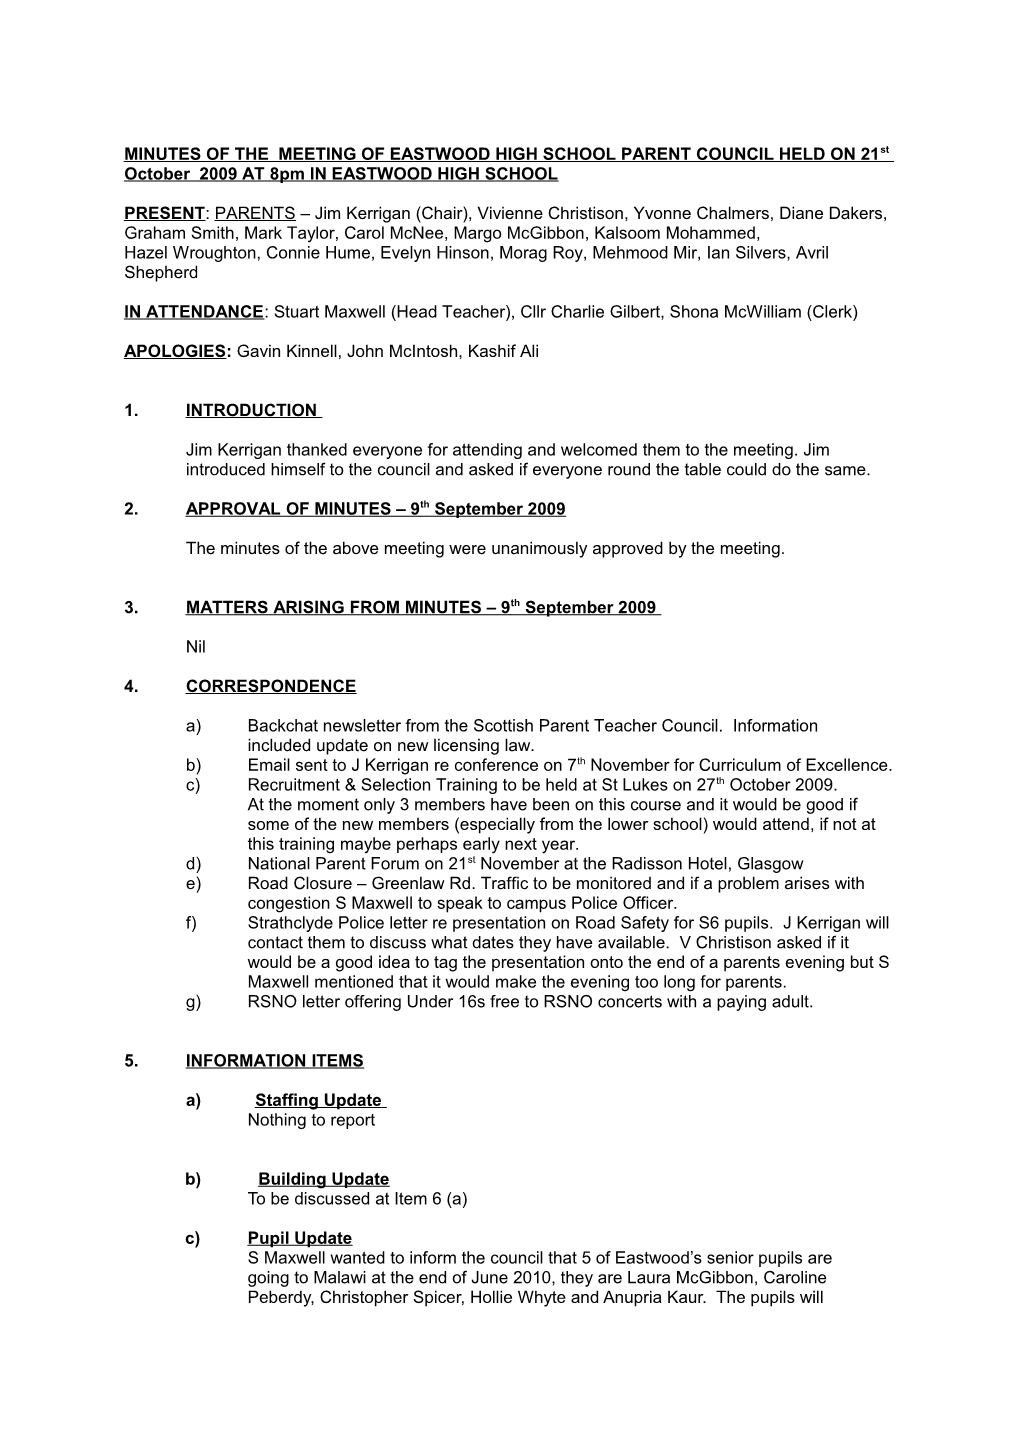 MINUTES of the MEETING of EASTWOOD HIGH SCHOOL PARENT COUNCIL HELD on 21St October 2009